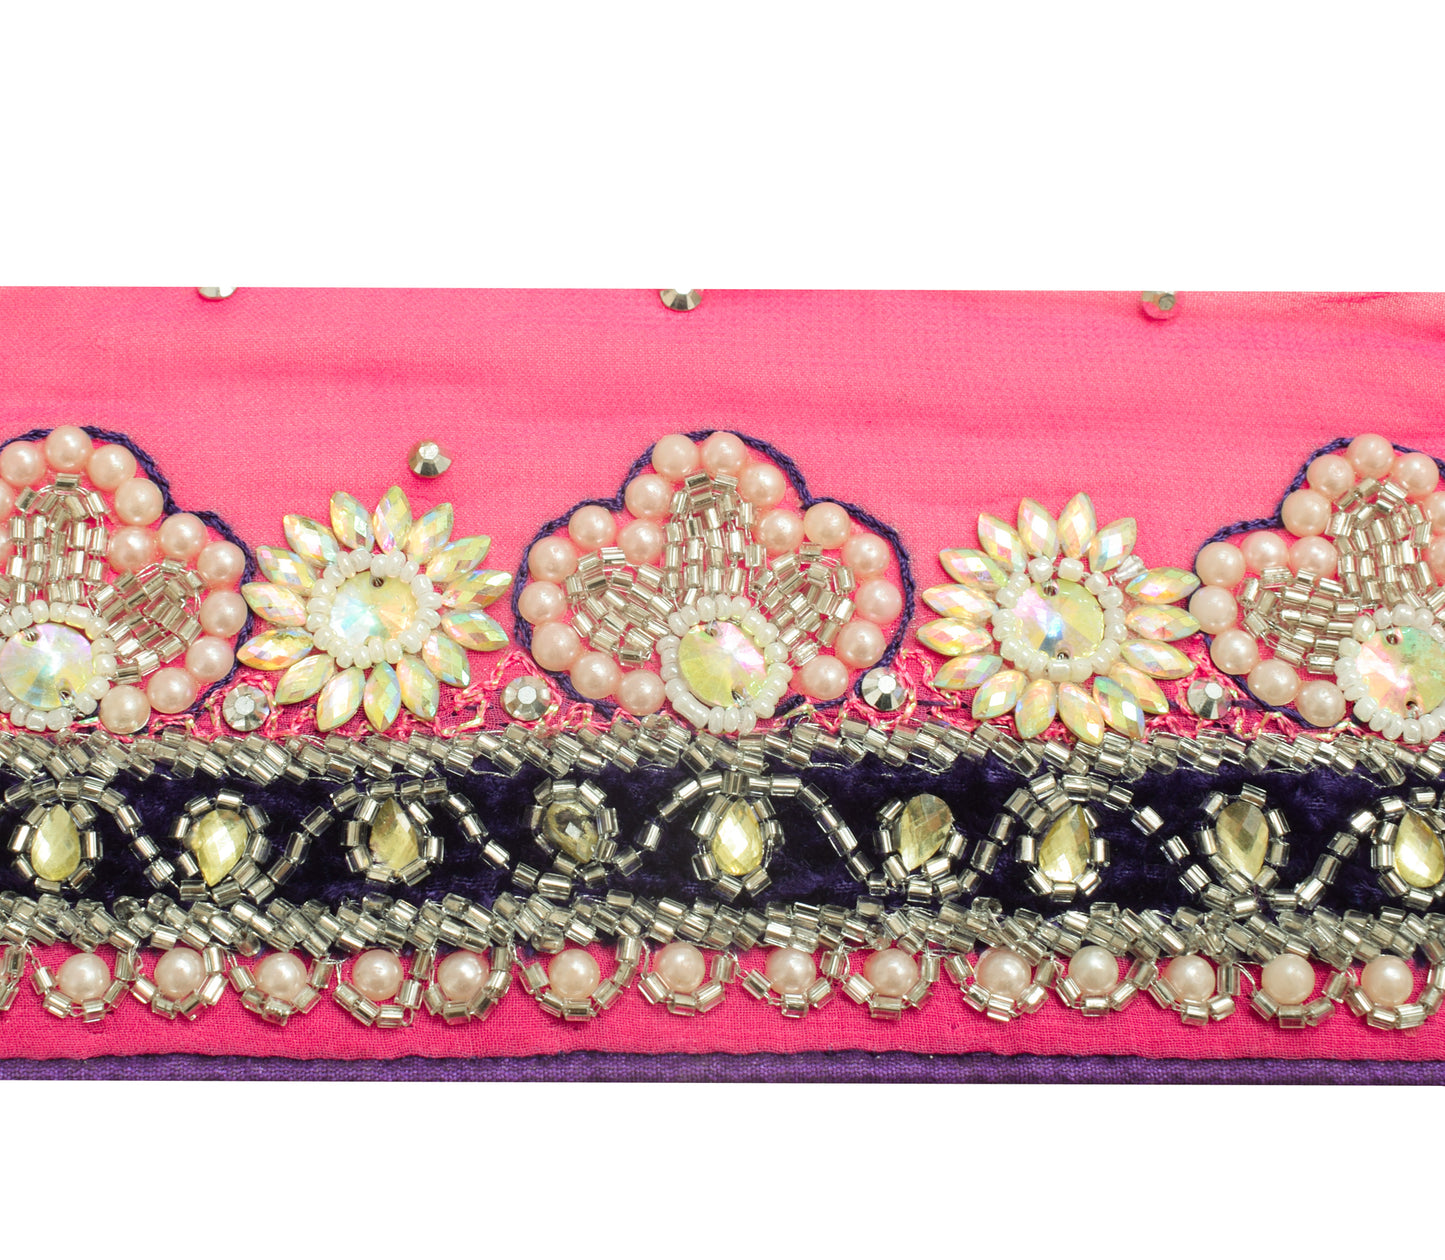 Sushila Vintage Pink Georgette Saree Border Craft Sewing Trim Hand Beaded Lace